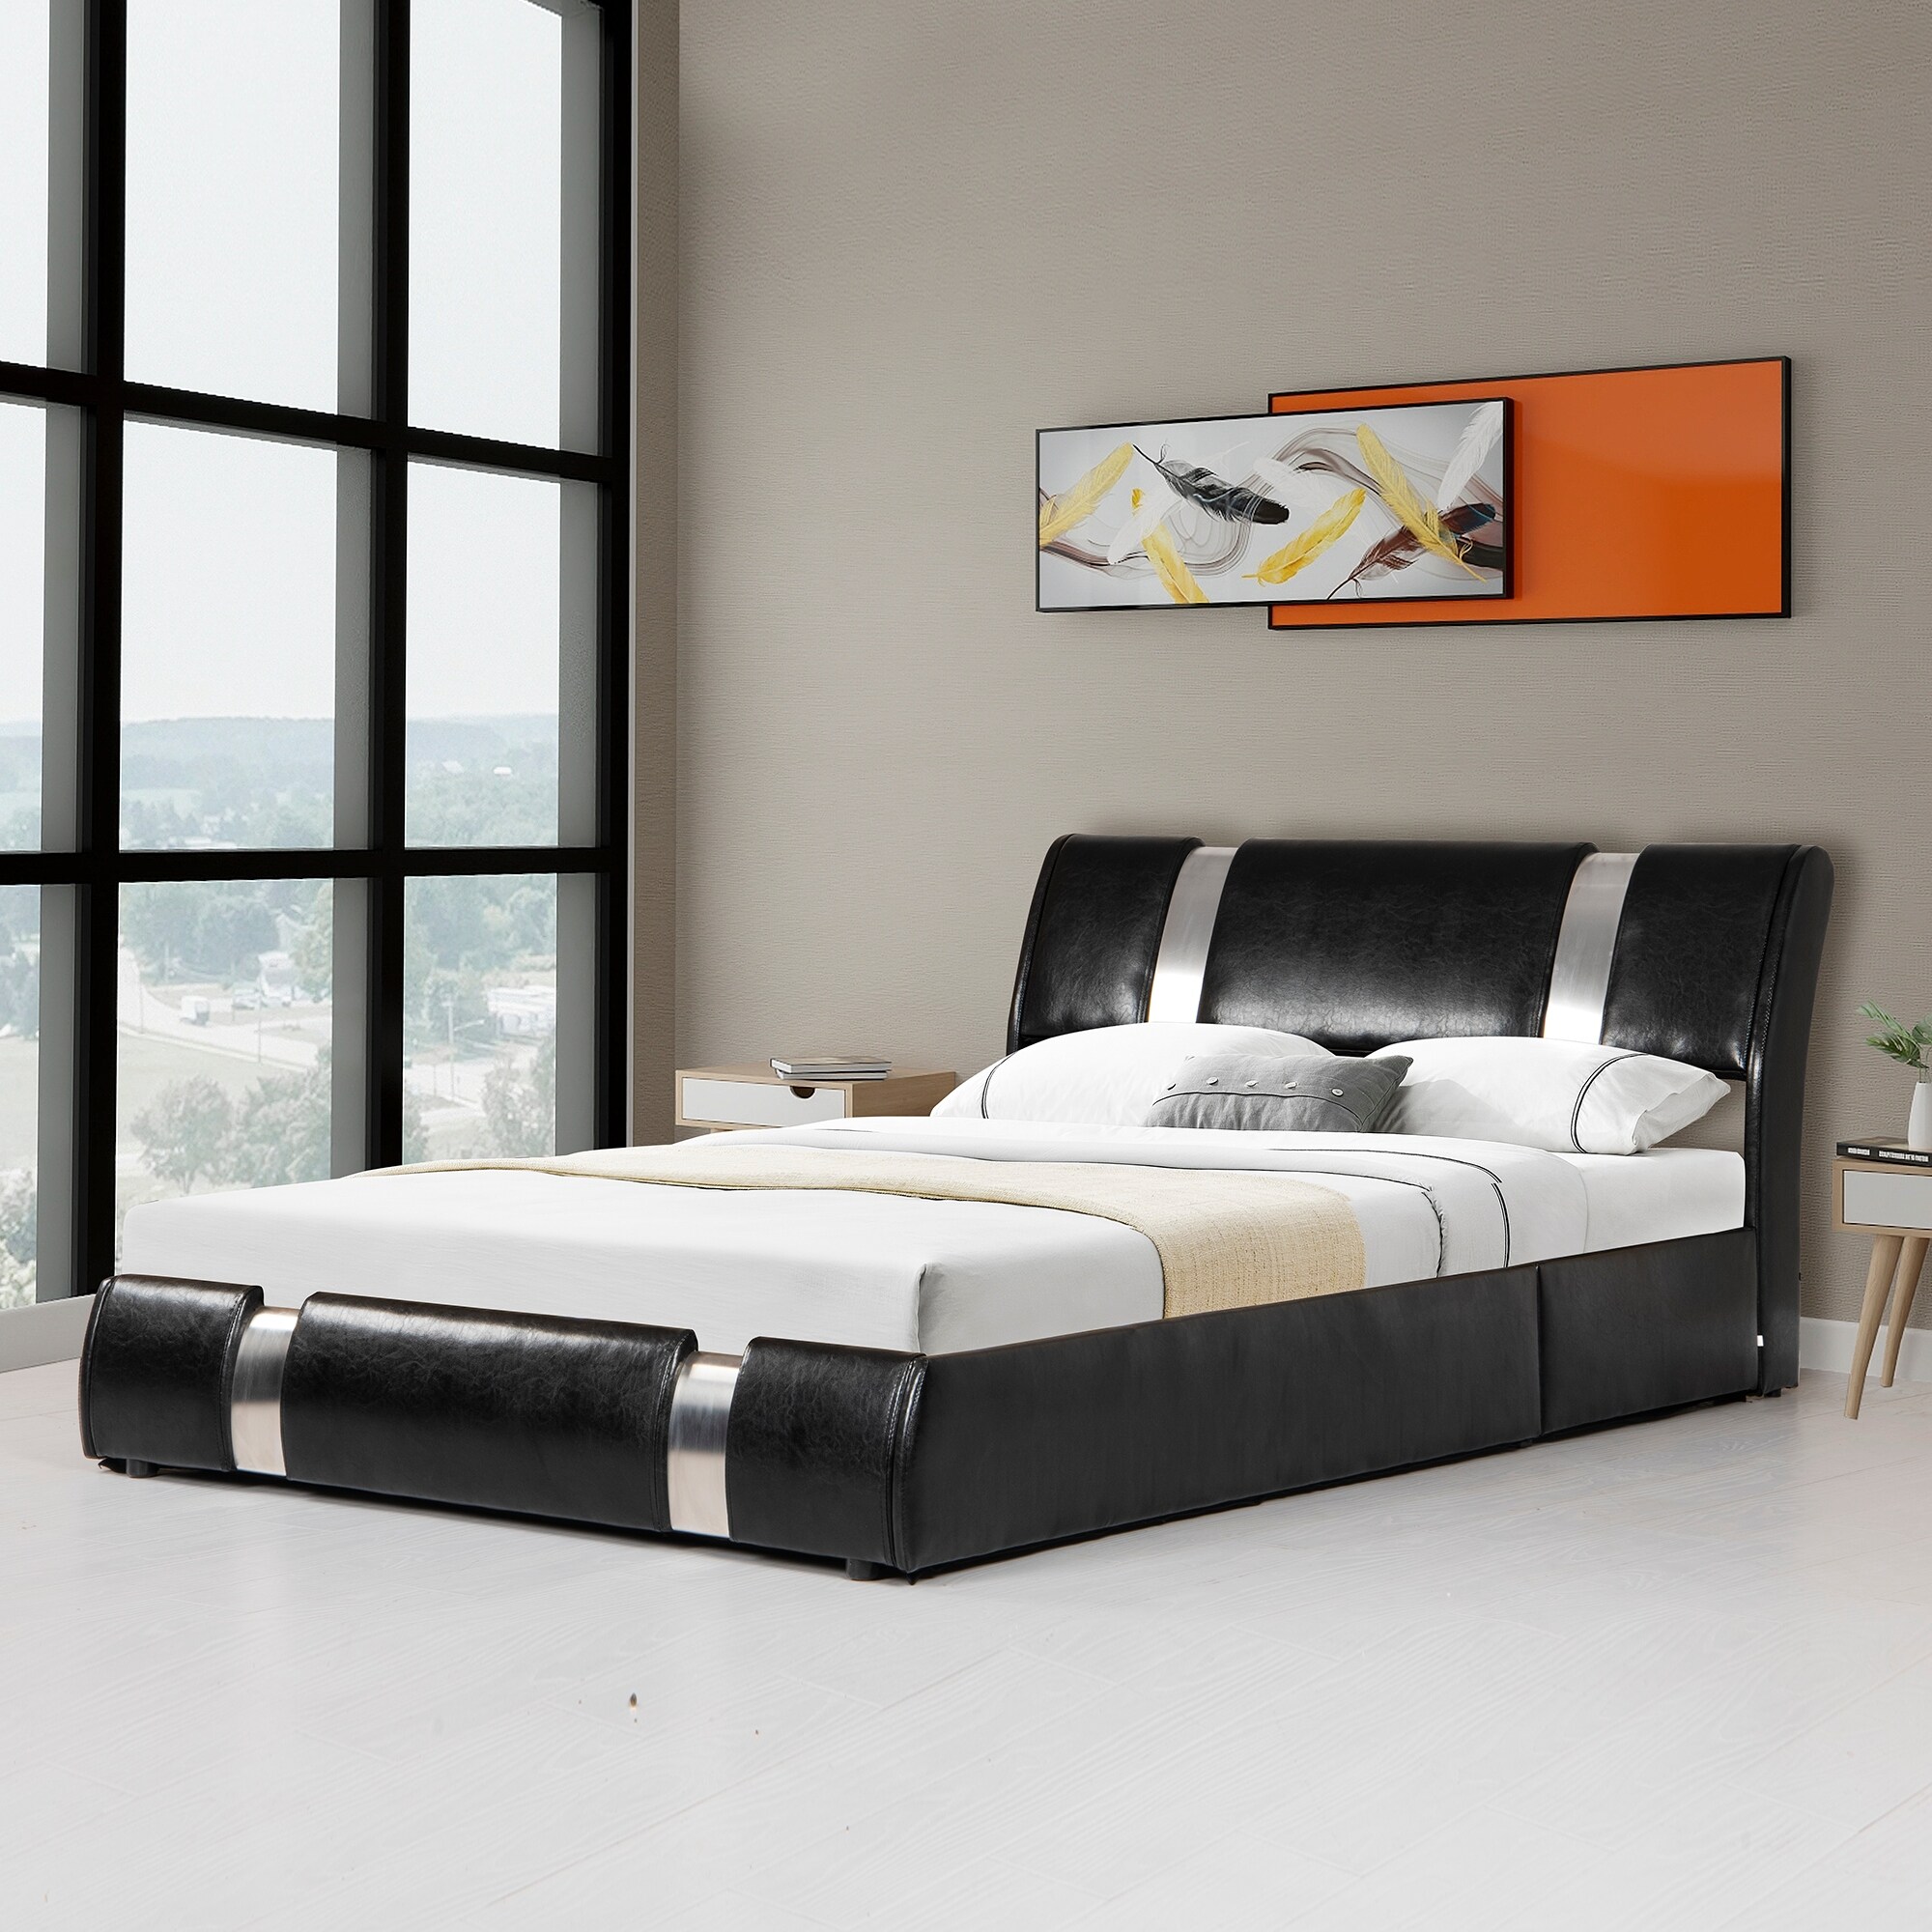 7x40 - 7 x 40 Contemporary Black Sloped Solid Wood Frame with UV - Bed Bath  & Beyond - 34942117